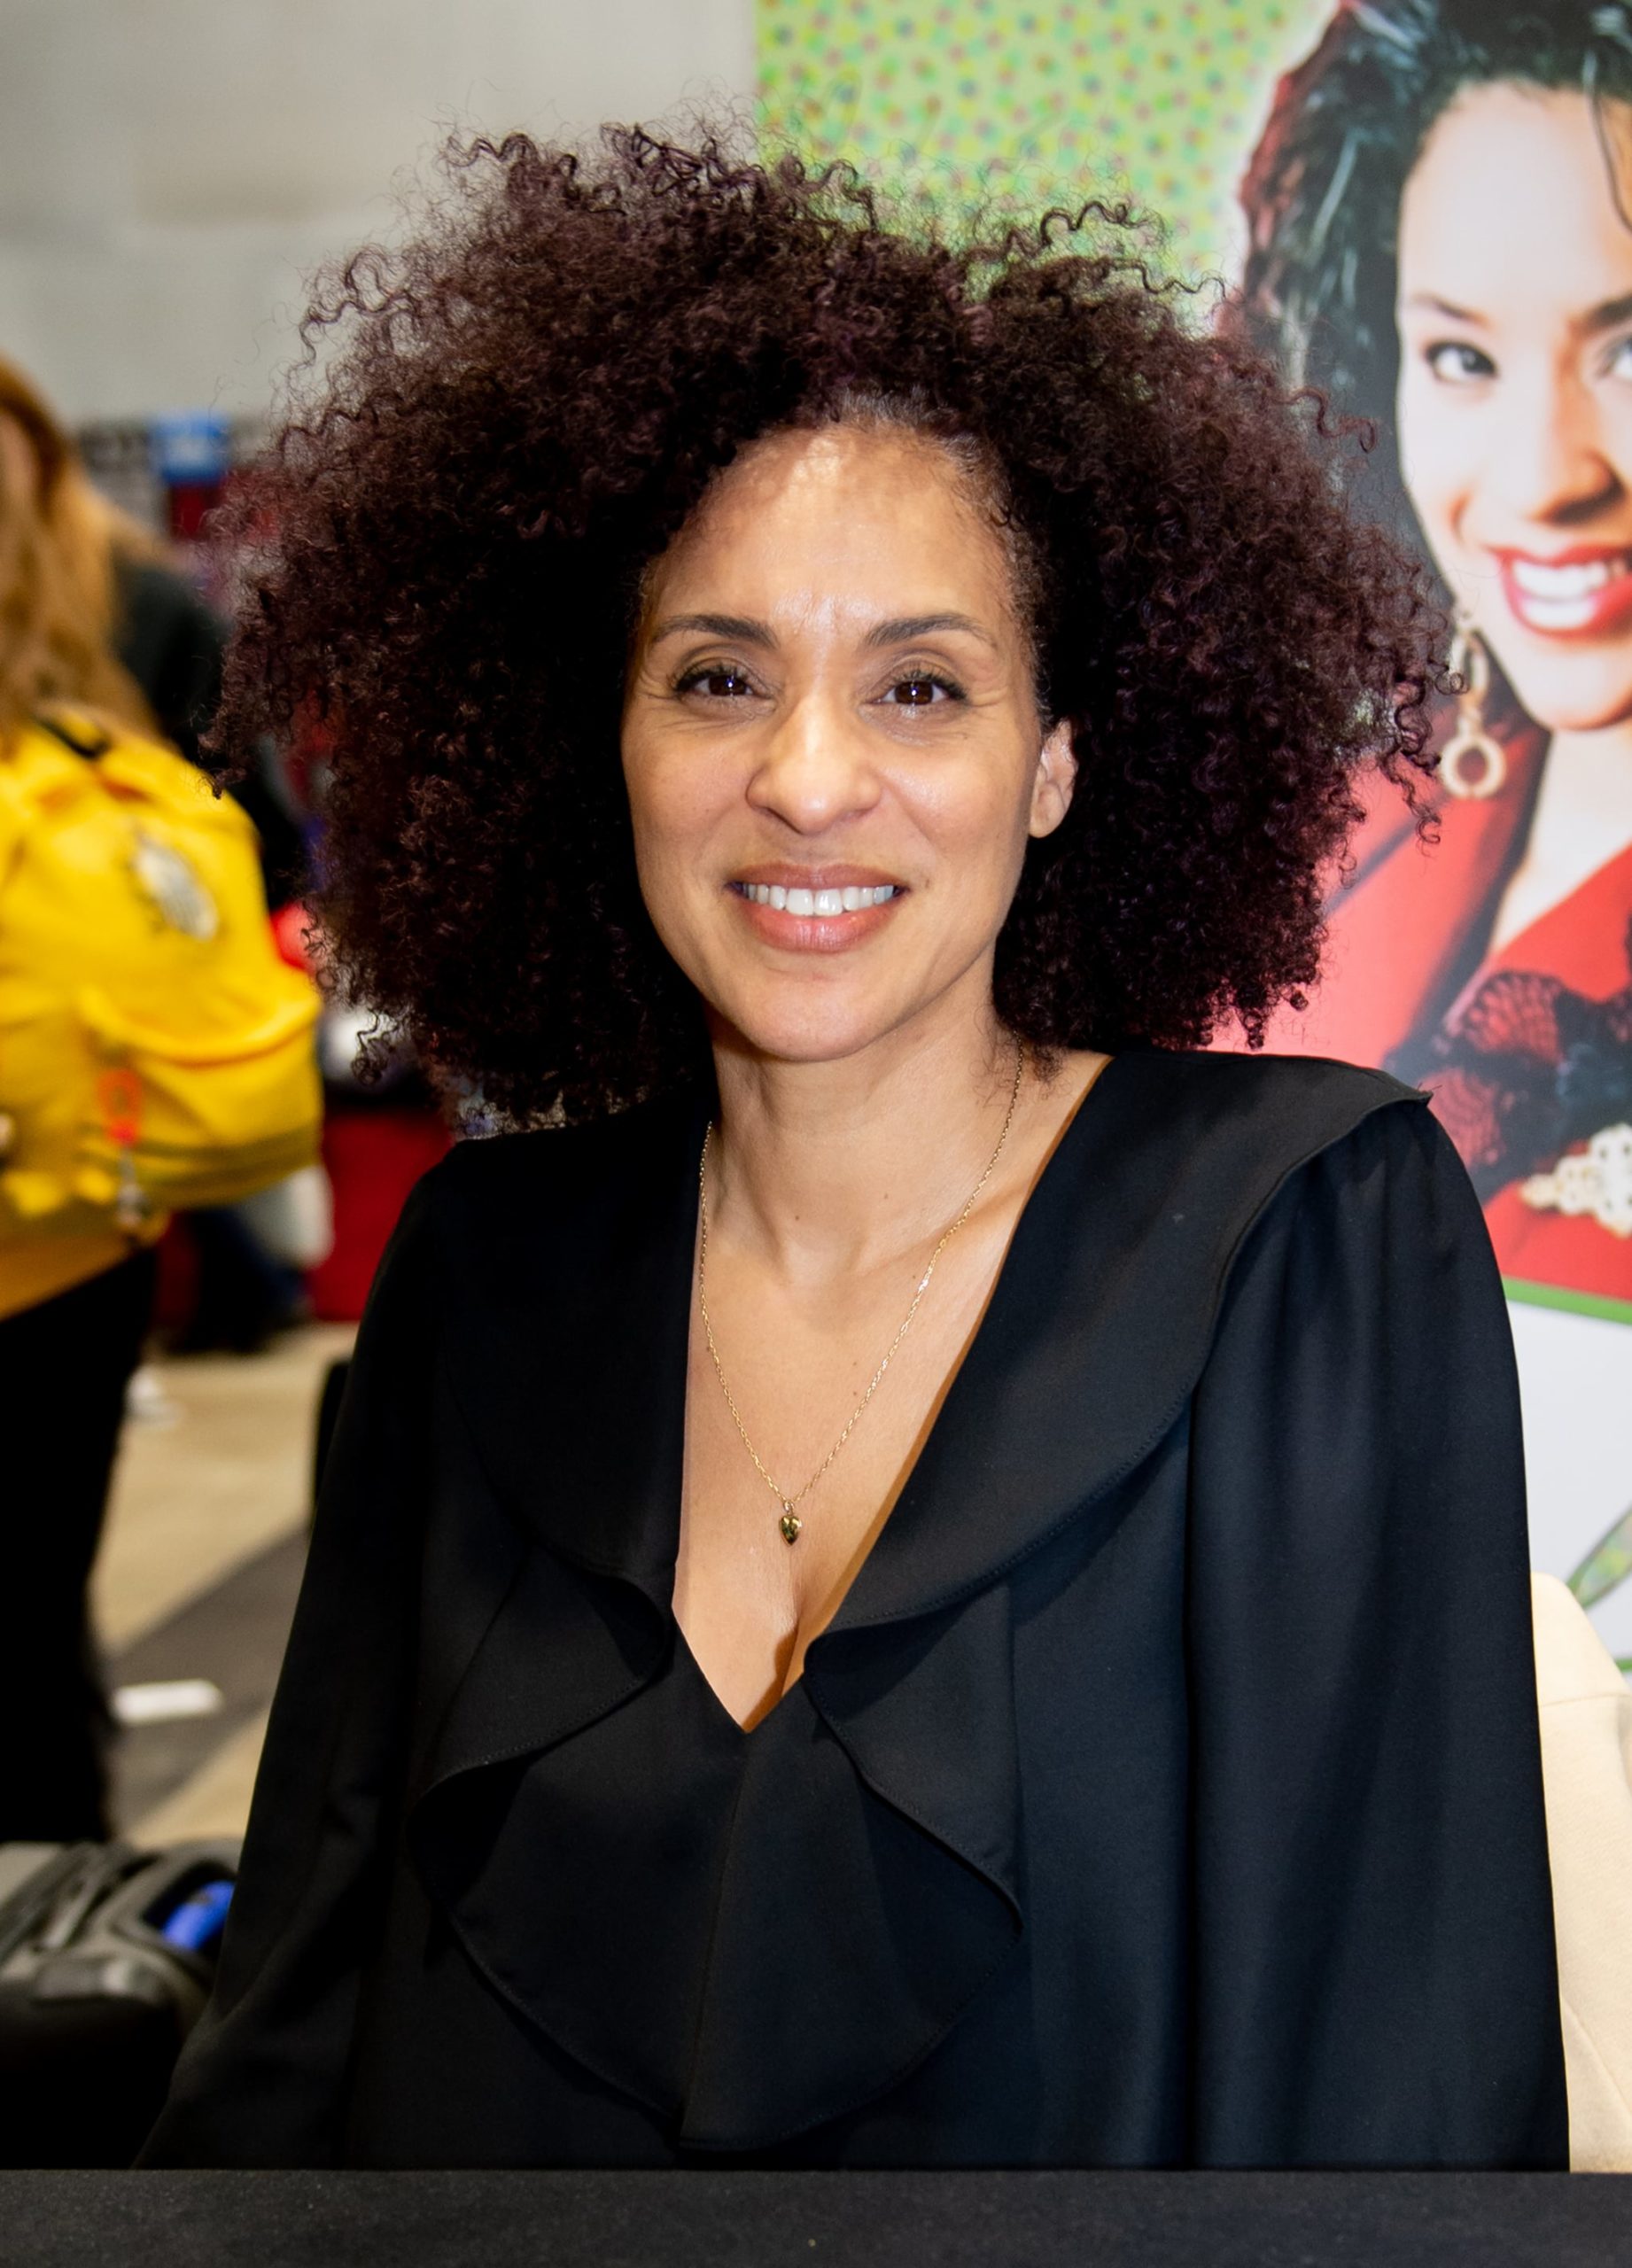 Fresh Prince of Bel Air Actress Karyn Parsons Now Has 2 Kids Director Alexandre Rockwell!